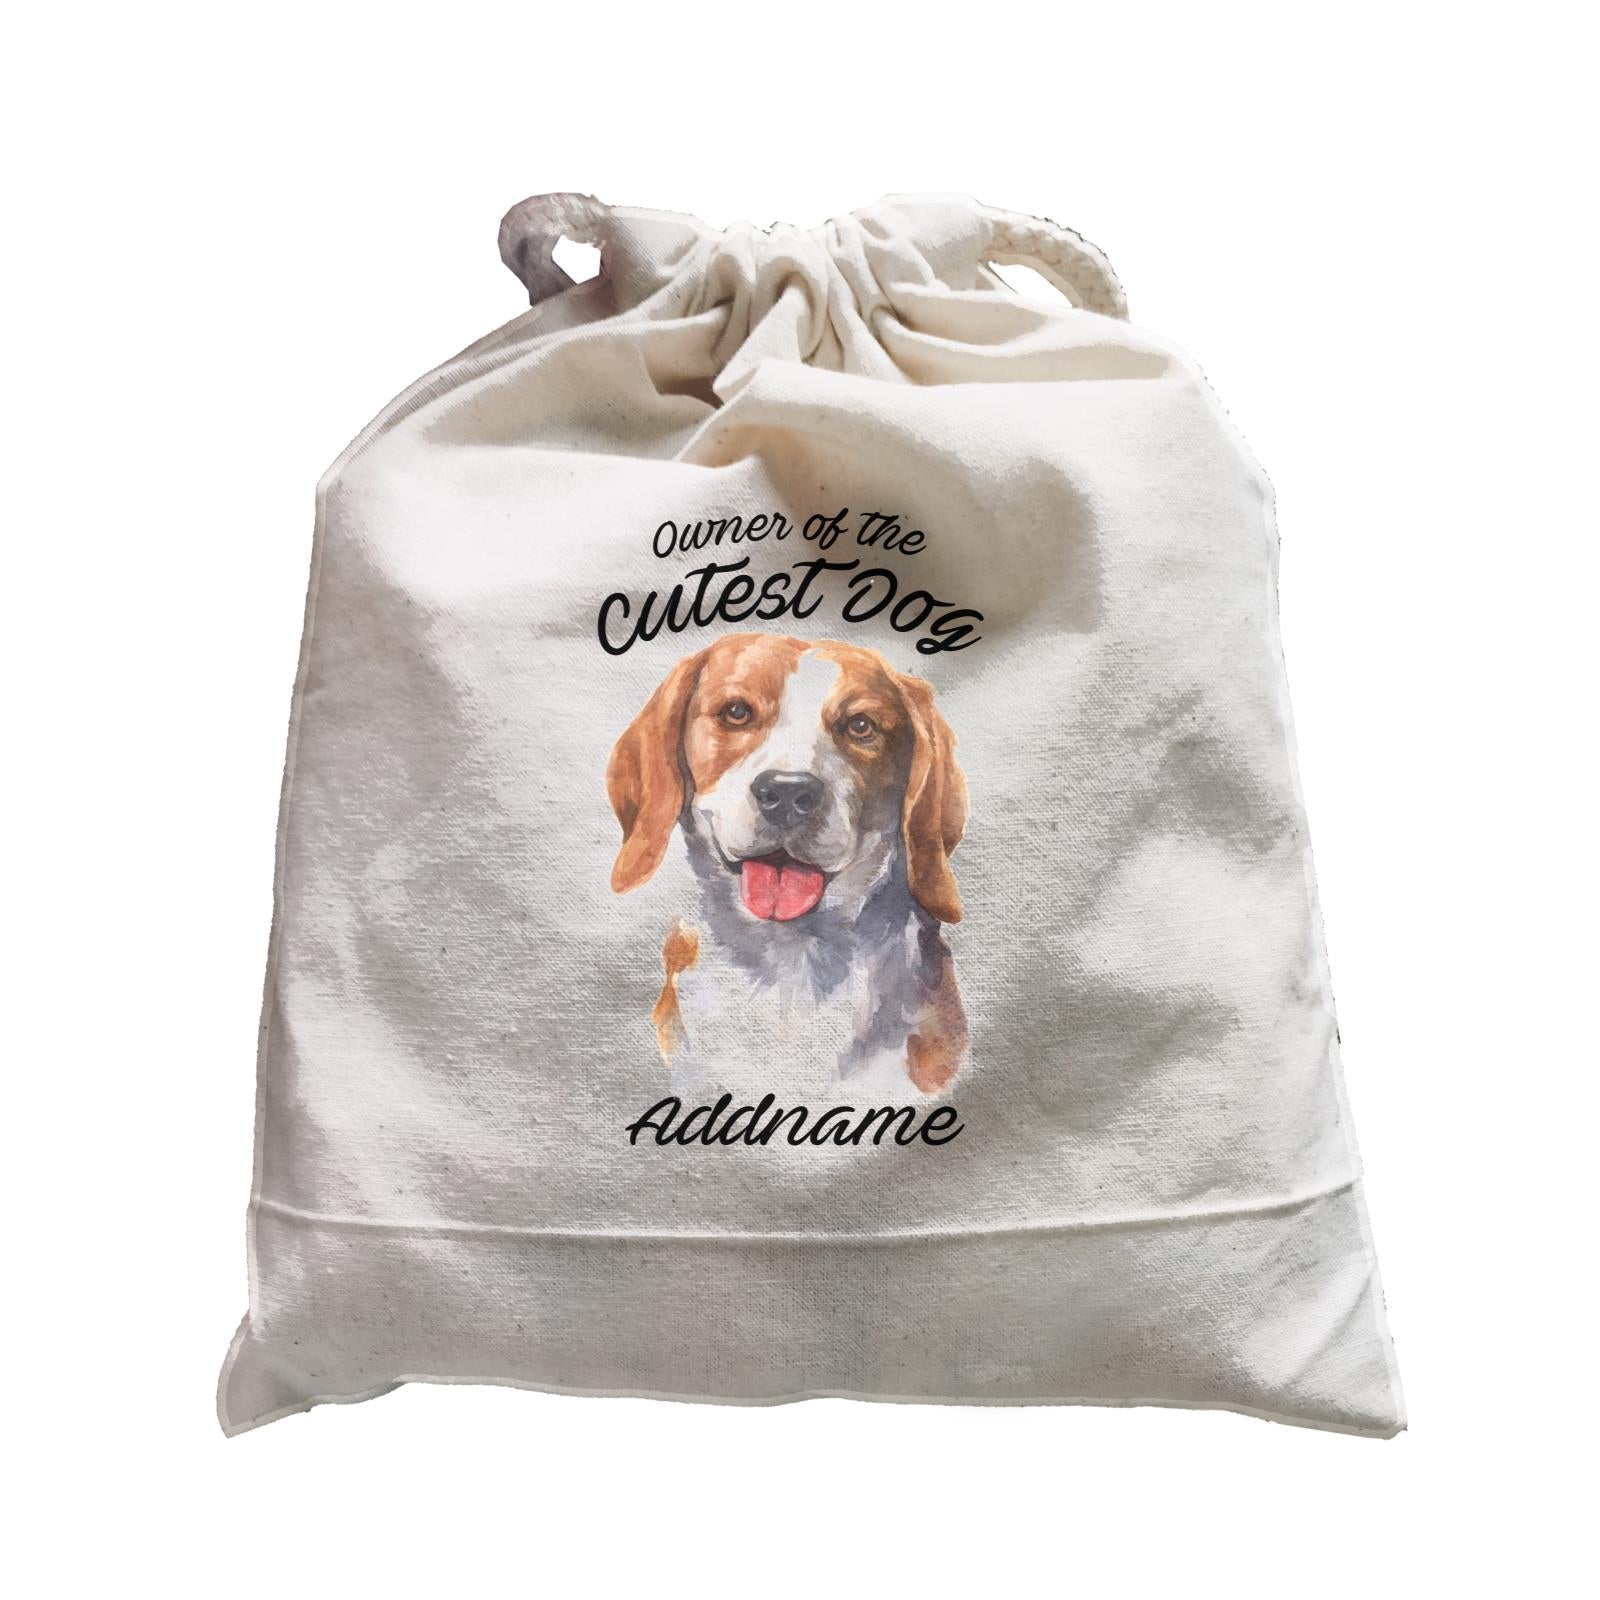 Watercolor Dog Owner Of The Cutest Dog Beagle Smile Addname Satchel